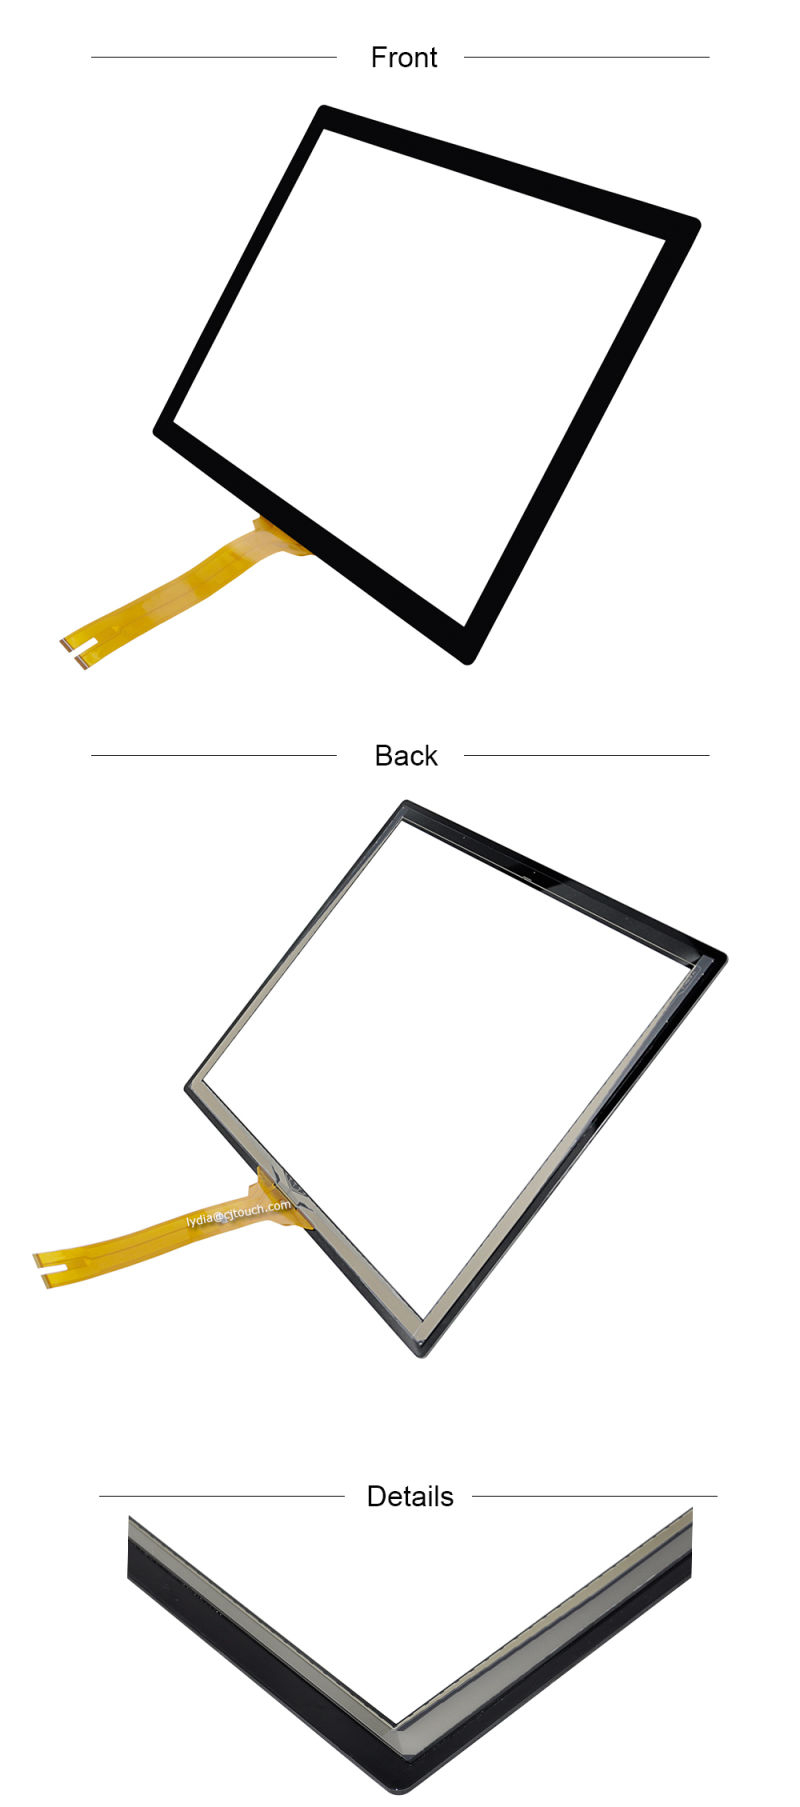 Cjtouch 19inch Projected Capacitive Touch Glass Panel